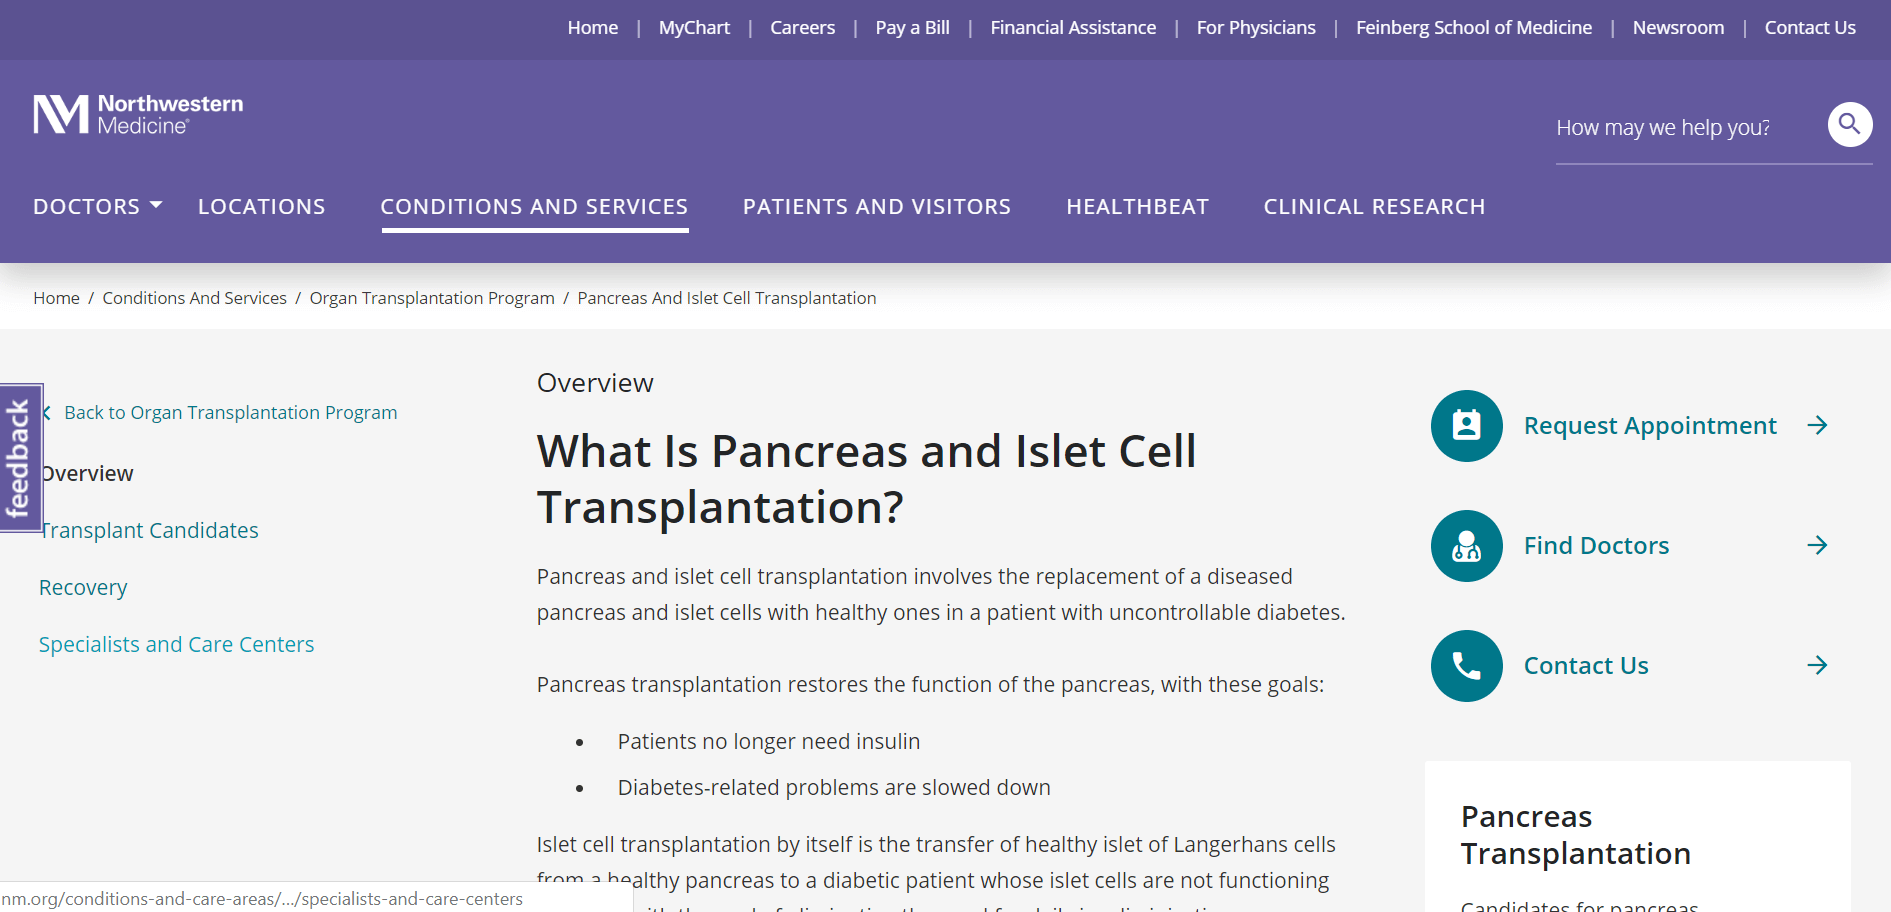 Northwestern Medicine, What is Pancreas and Islet Cell Transplantation?